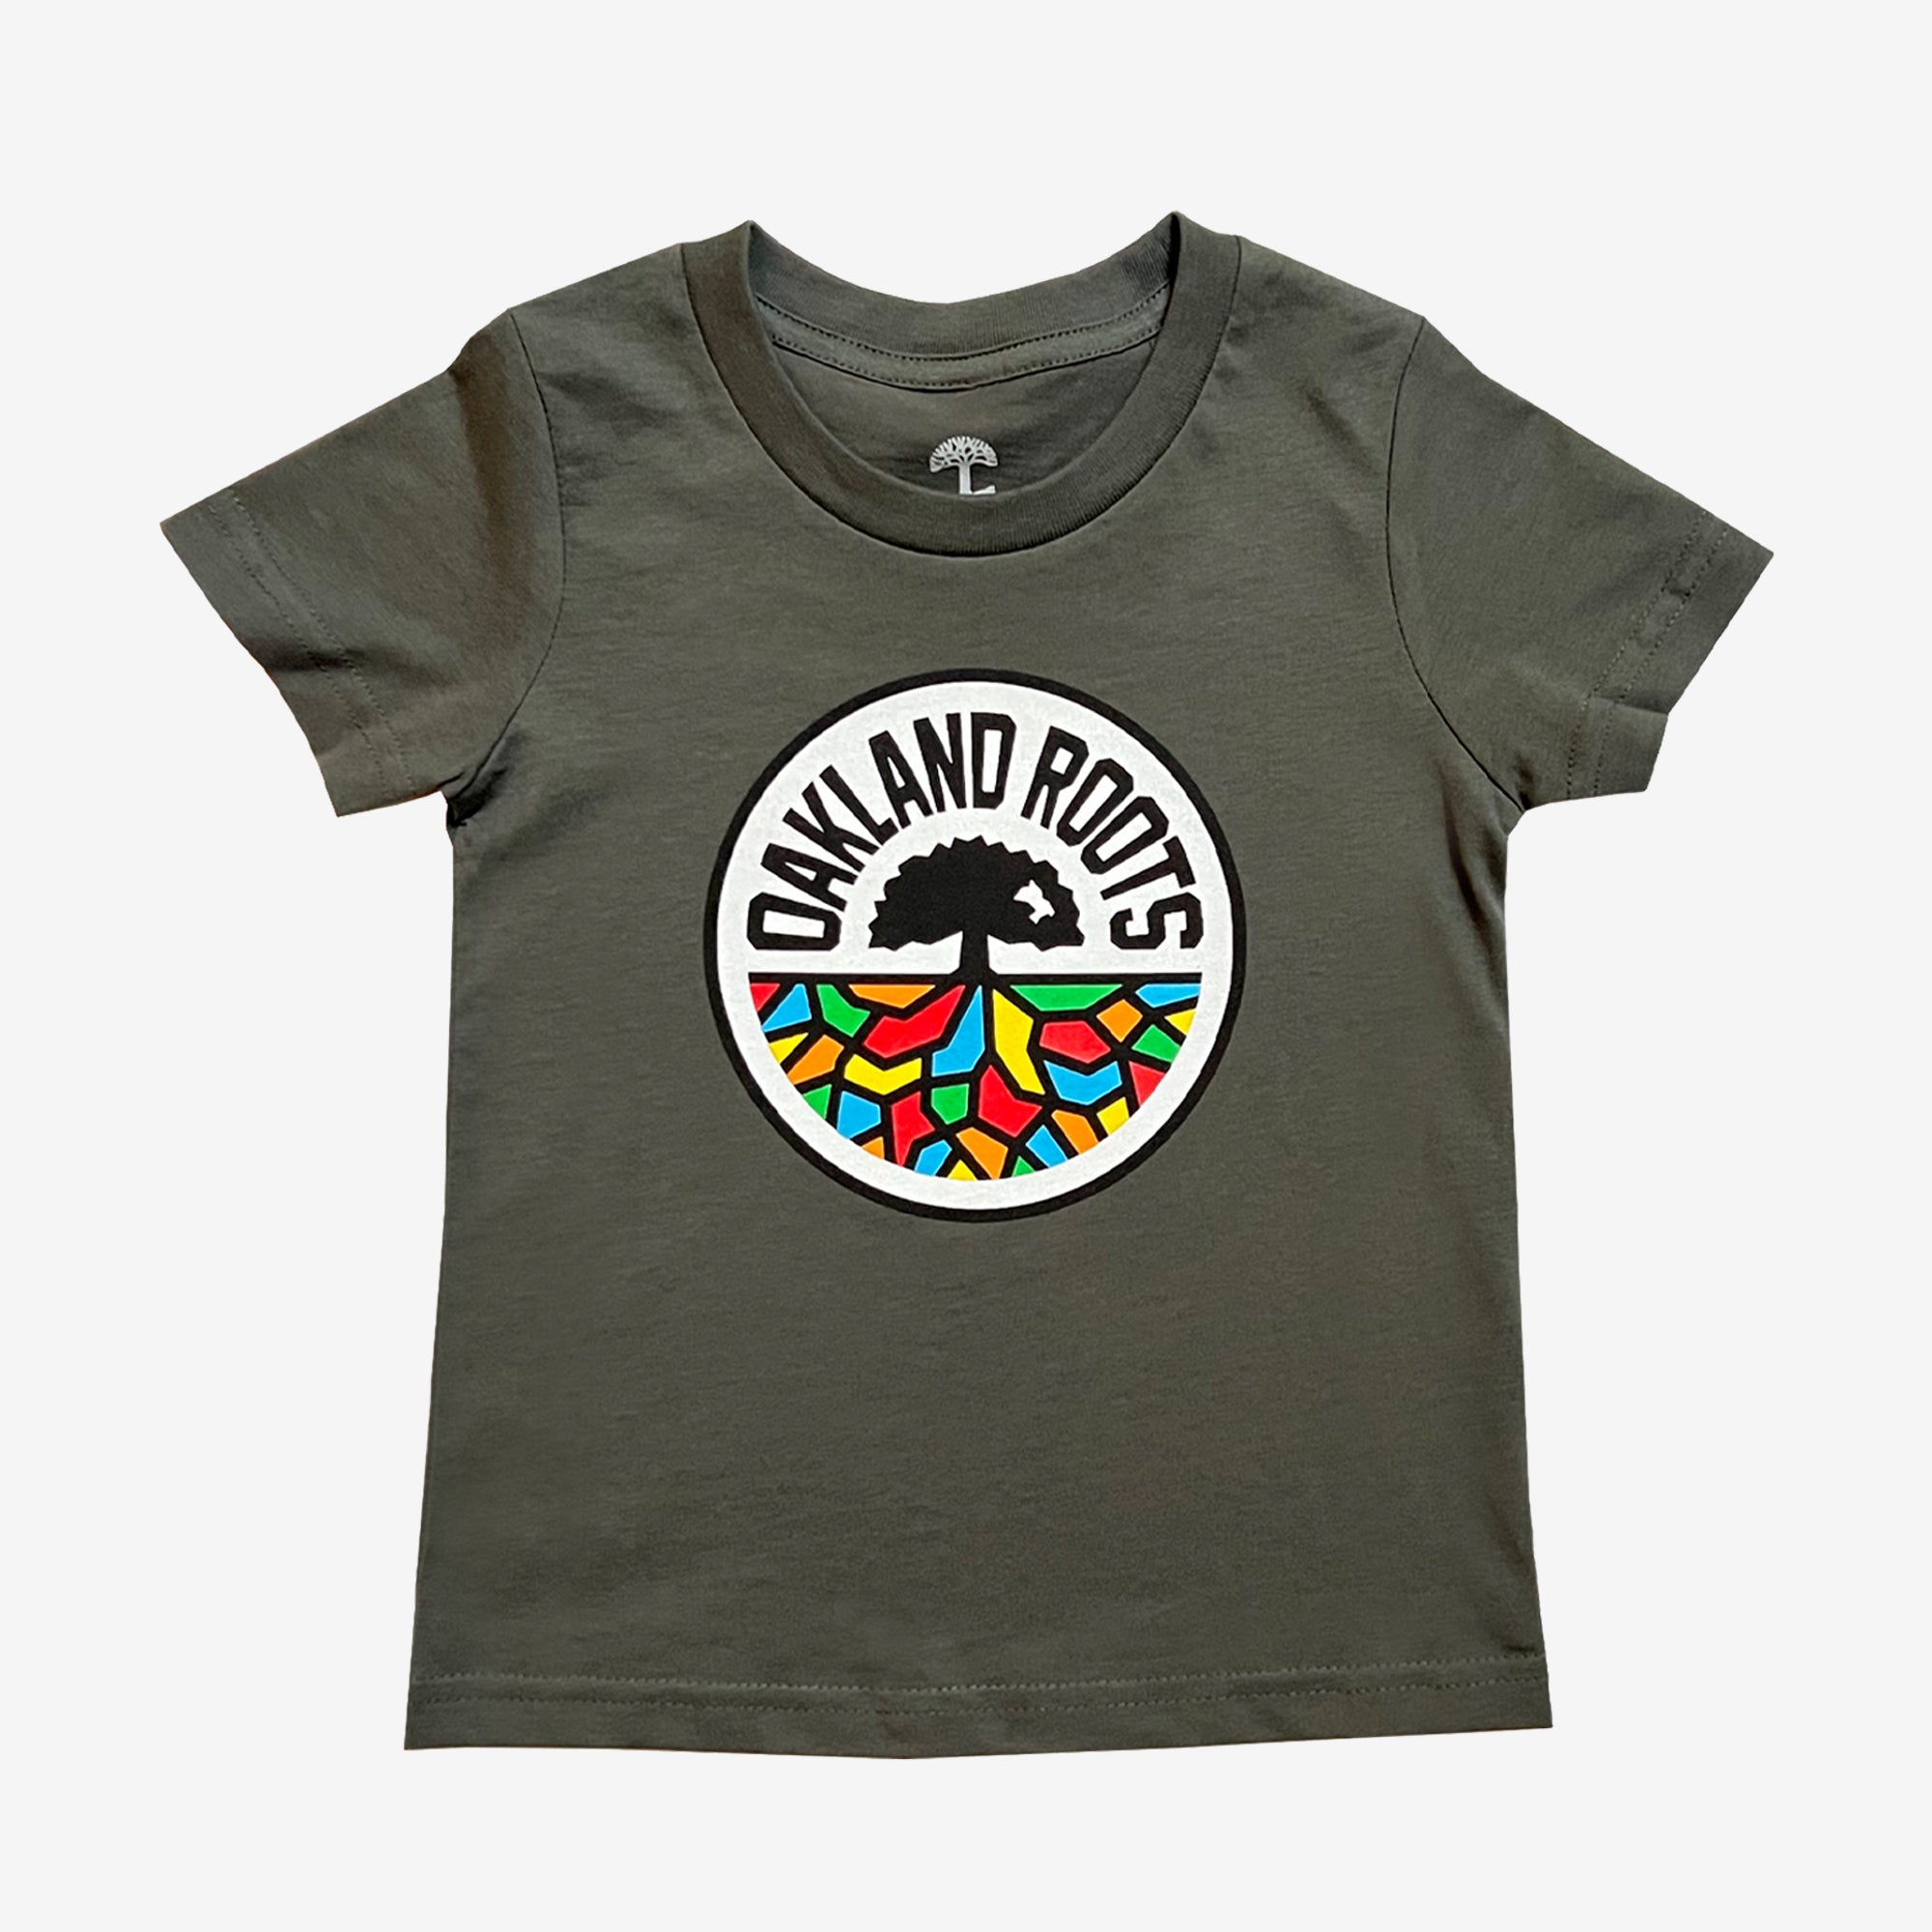 Charcoal grey  toddler-sized t-shirt with a full-color Roots SC logo on the chest.